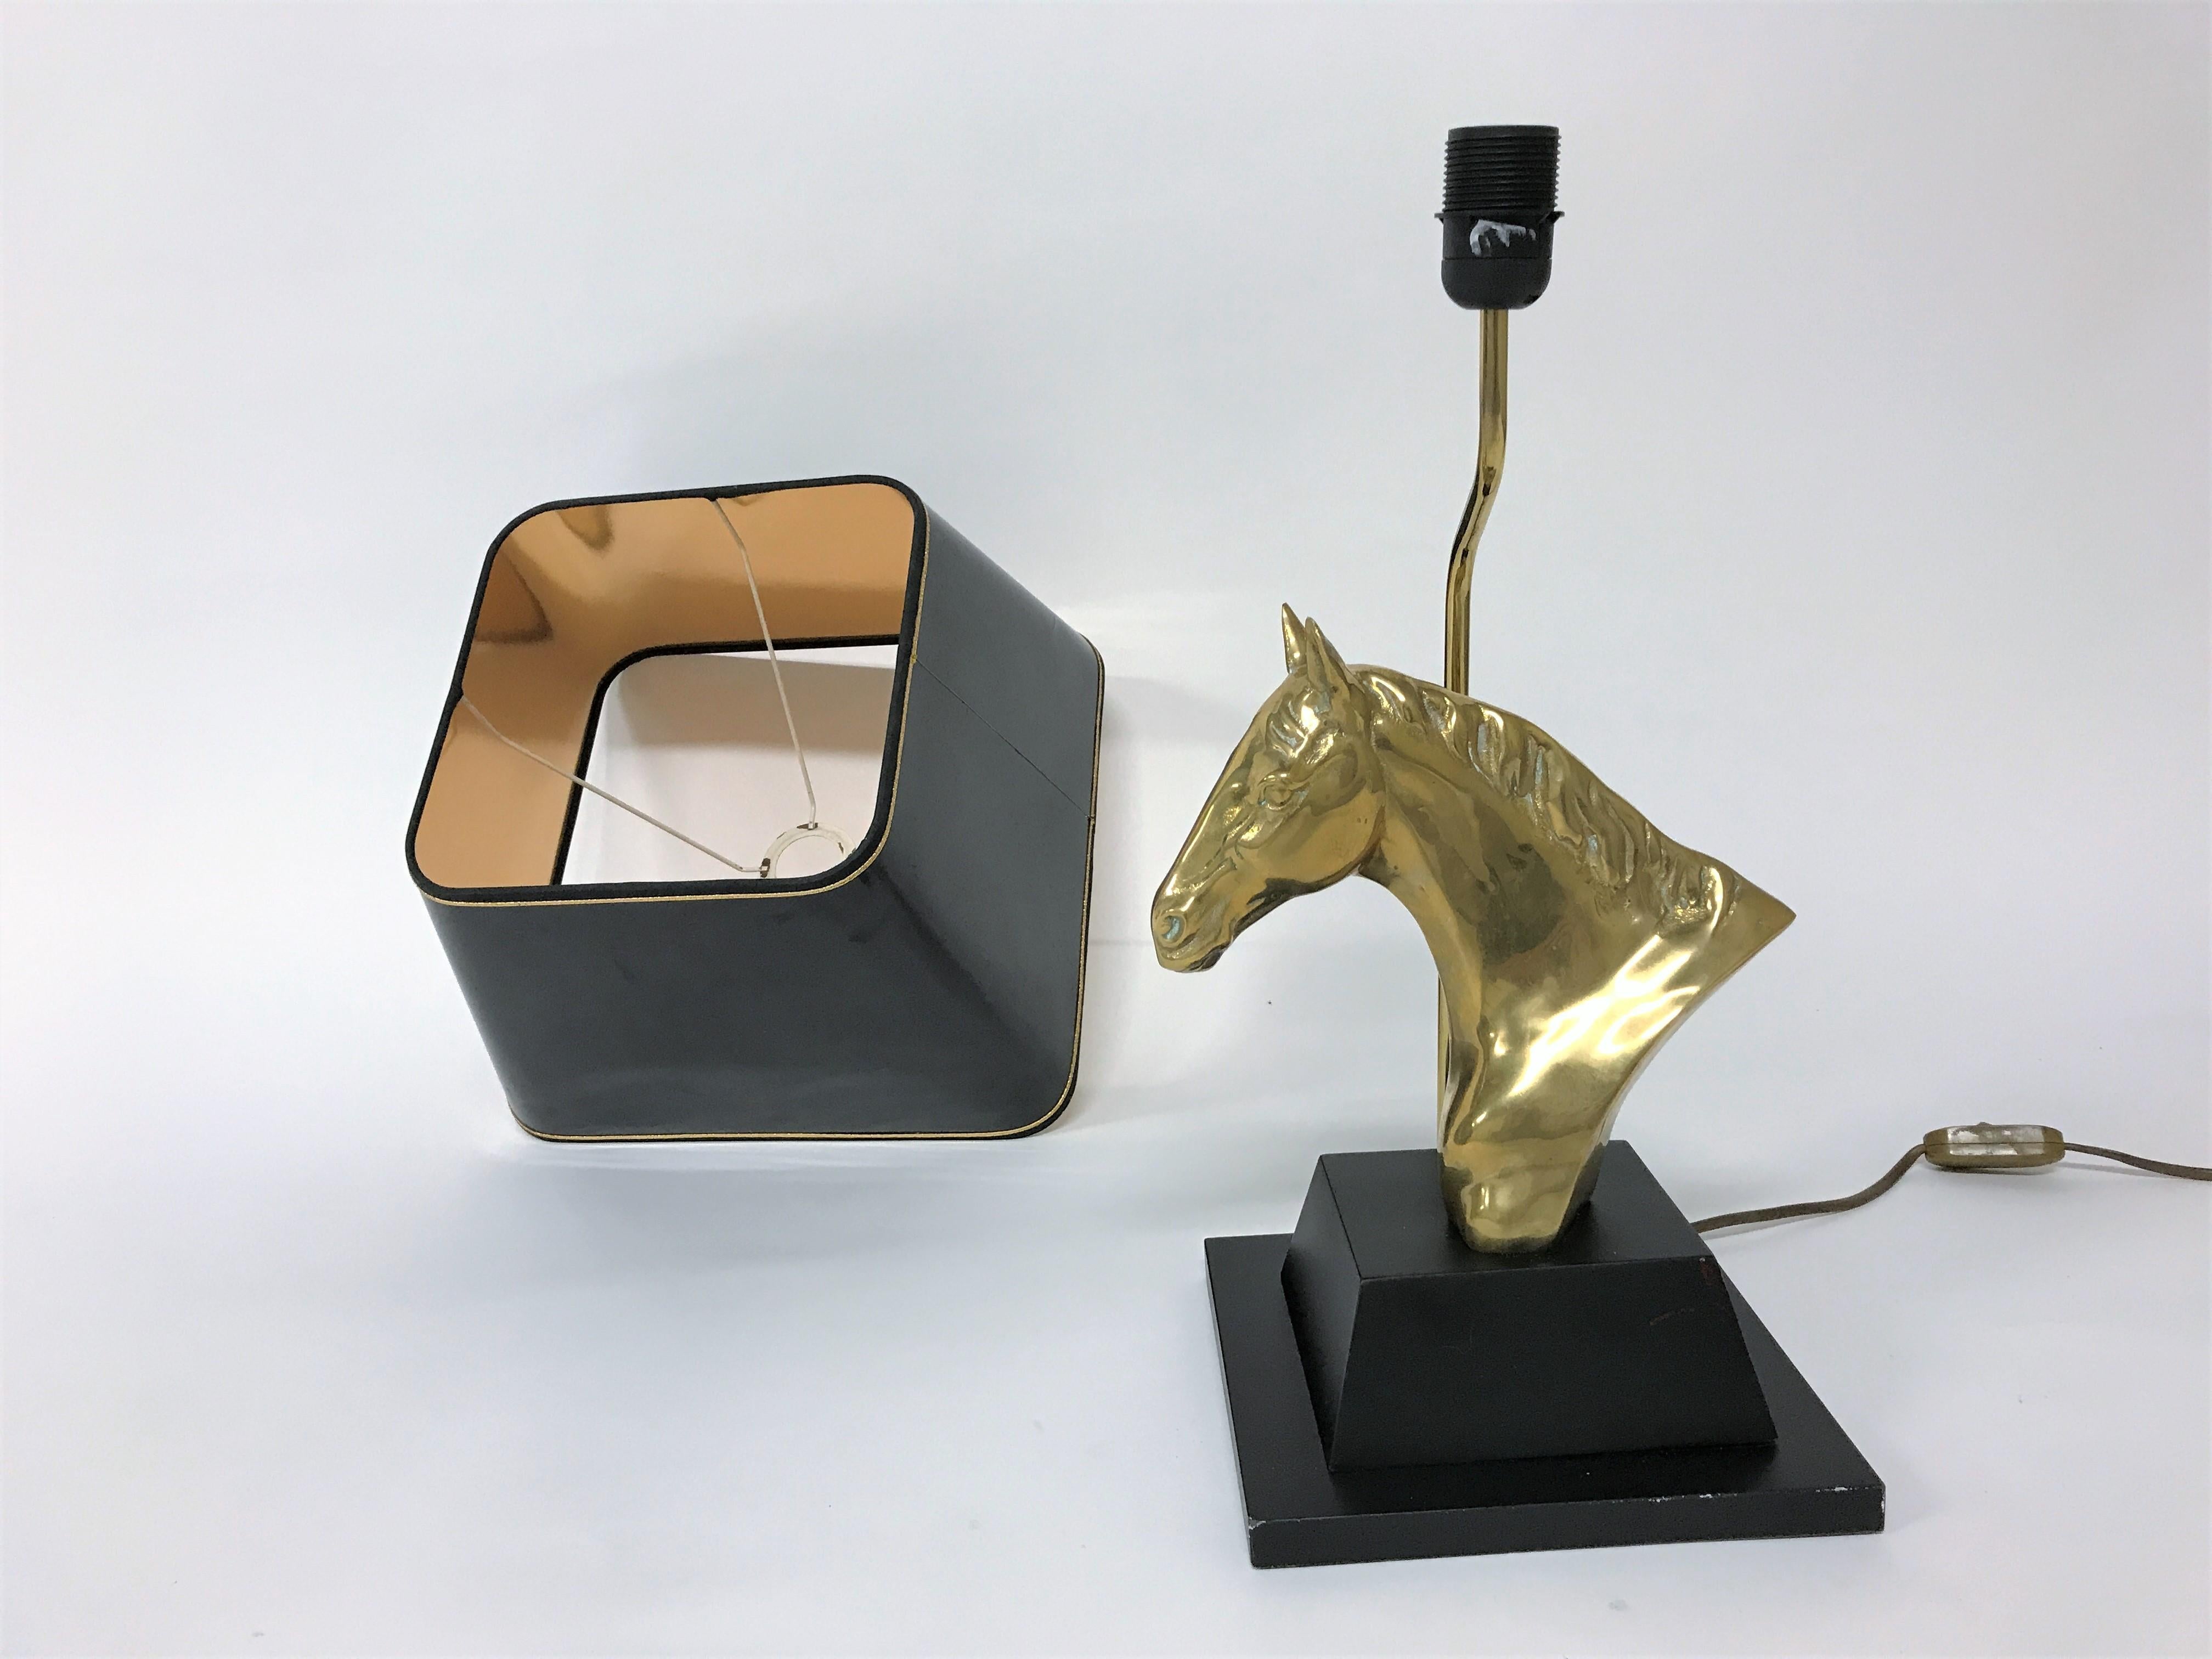 Brass horse head table lamp in the style of Maison Jansen.

The brass horse head is mounted on a lacquered wooden base and finished with a period black and gold shade.

Stylish table lamp with a luxurious appeal.

The height of the lamp shade